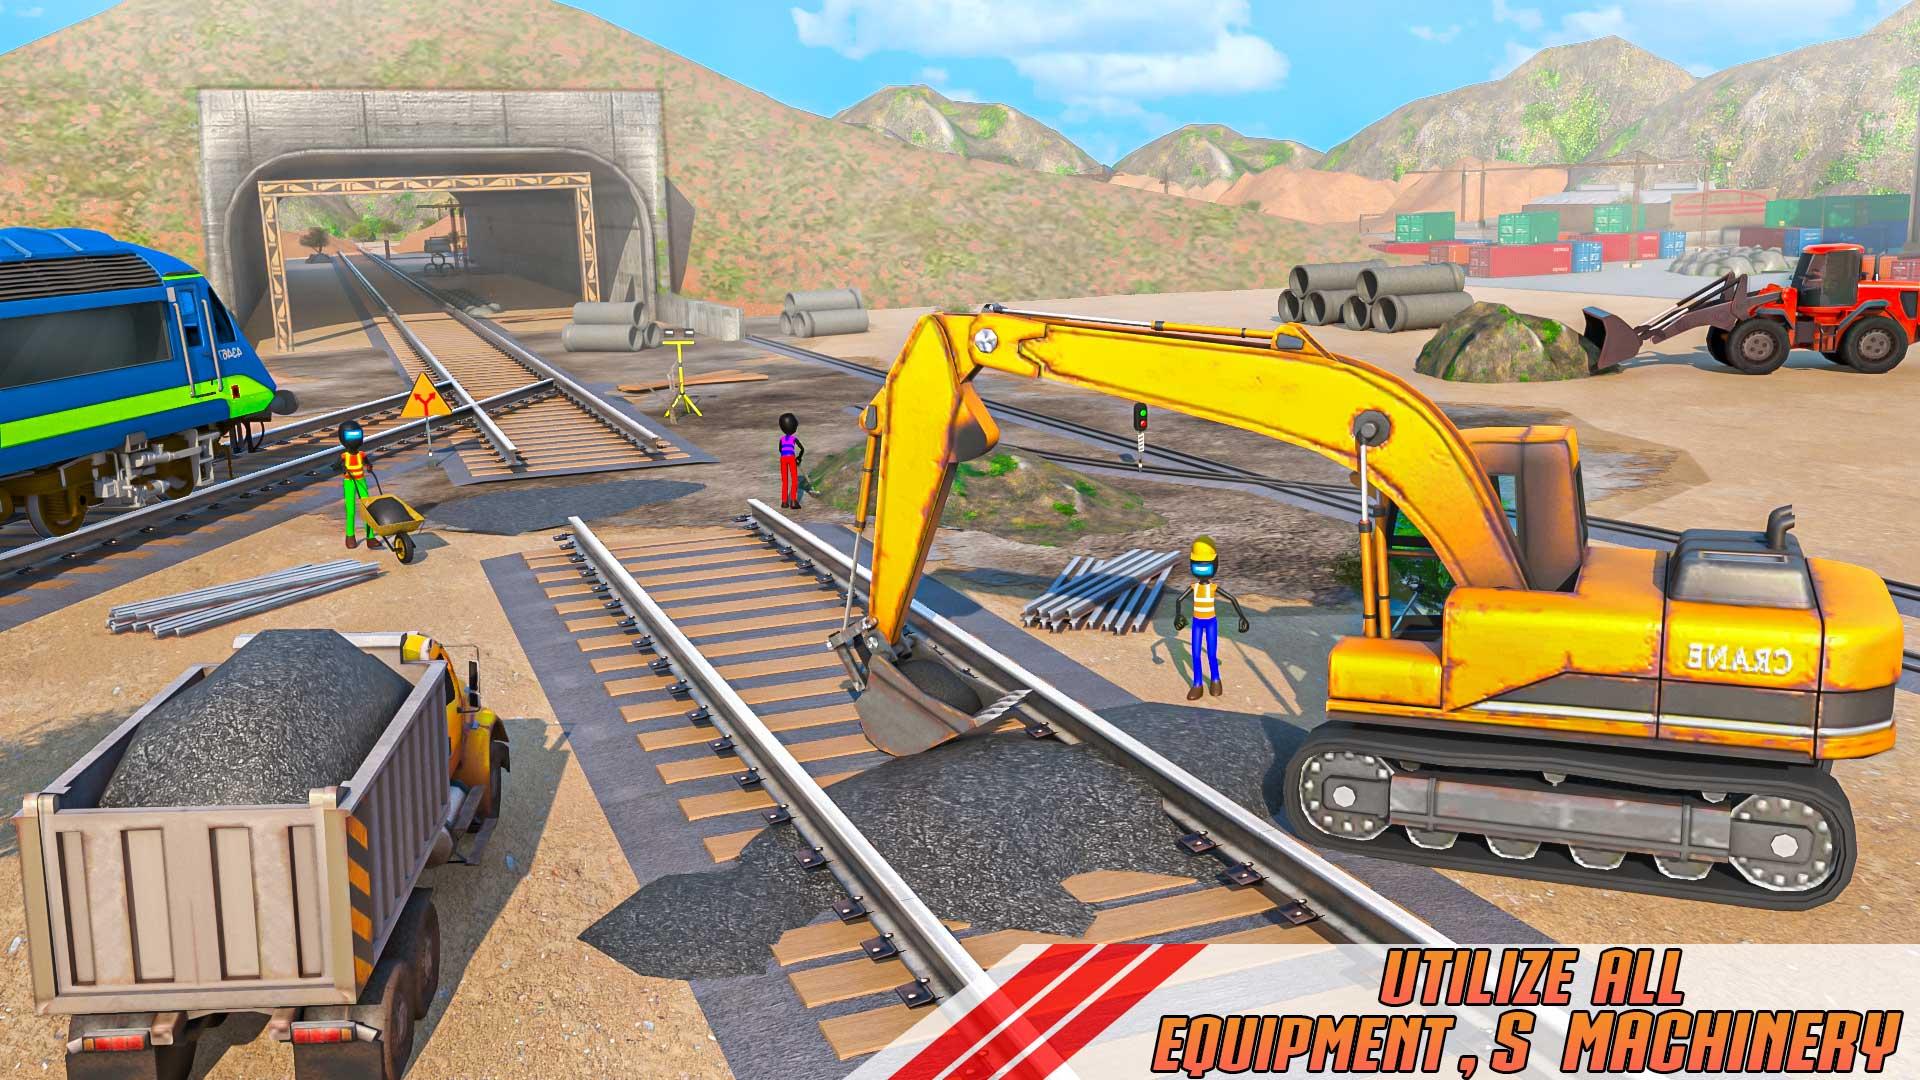 Grand Construction Excavator: Red Imposter Game 1.0 Screenshot 4